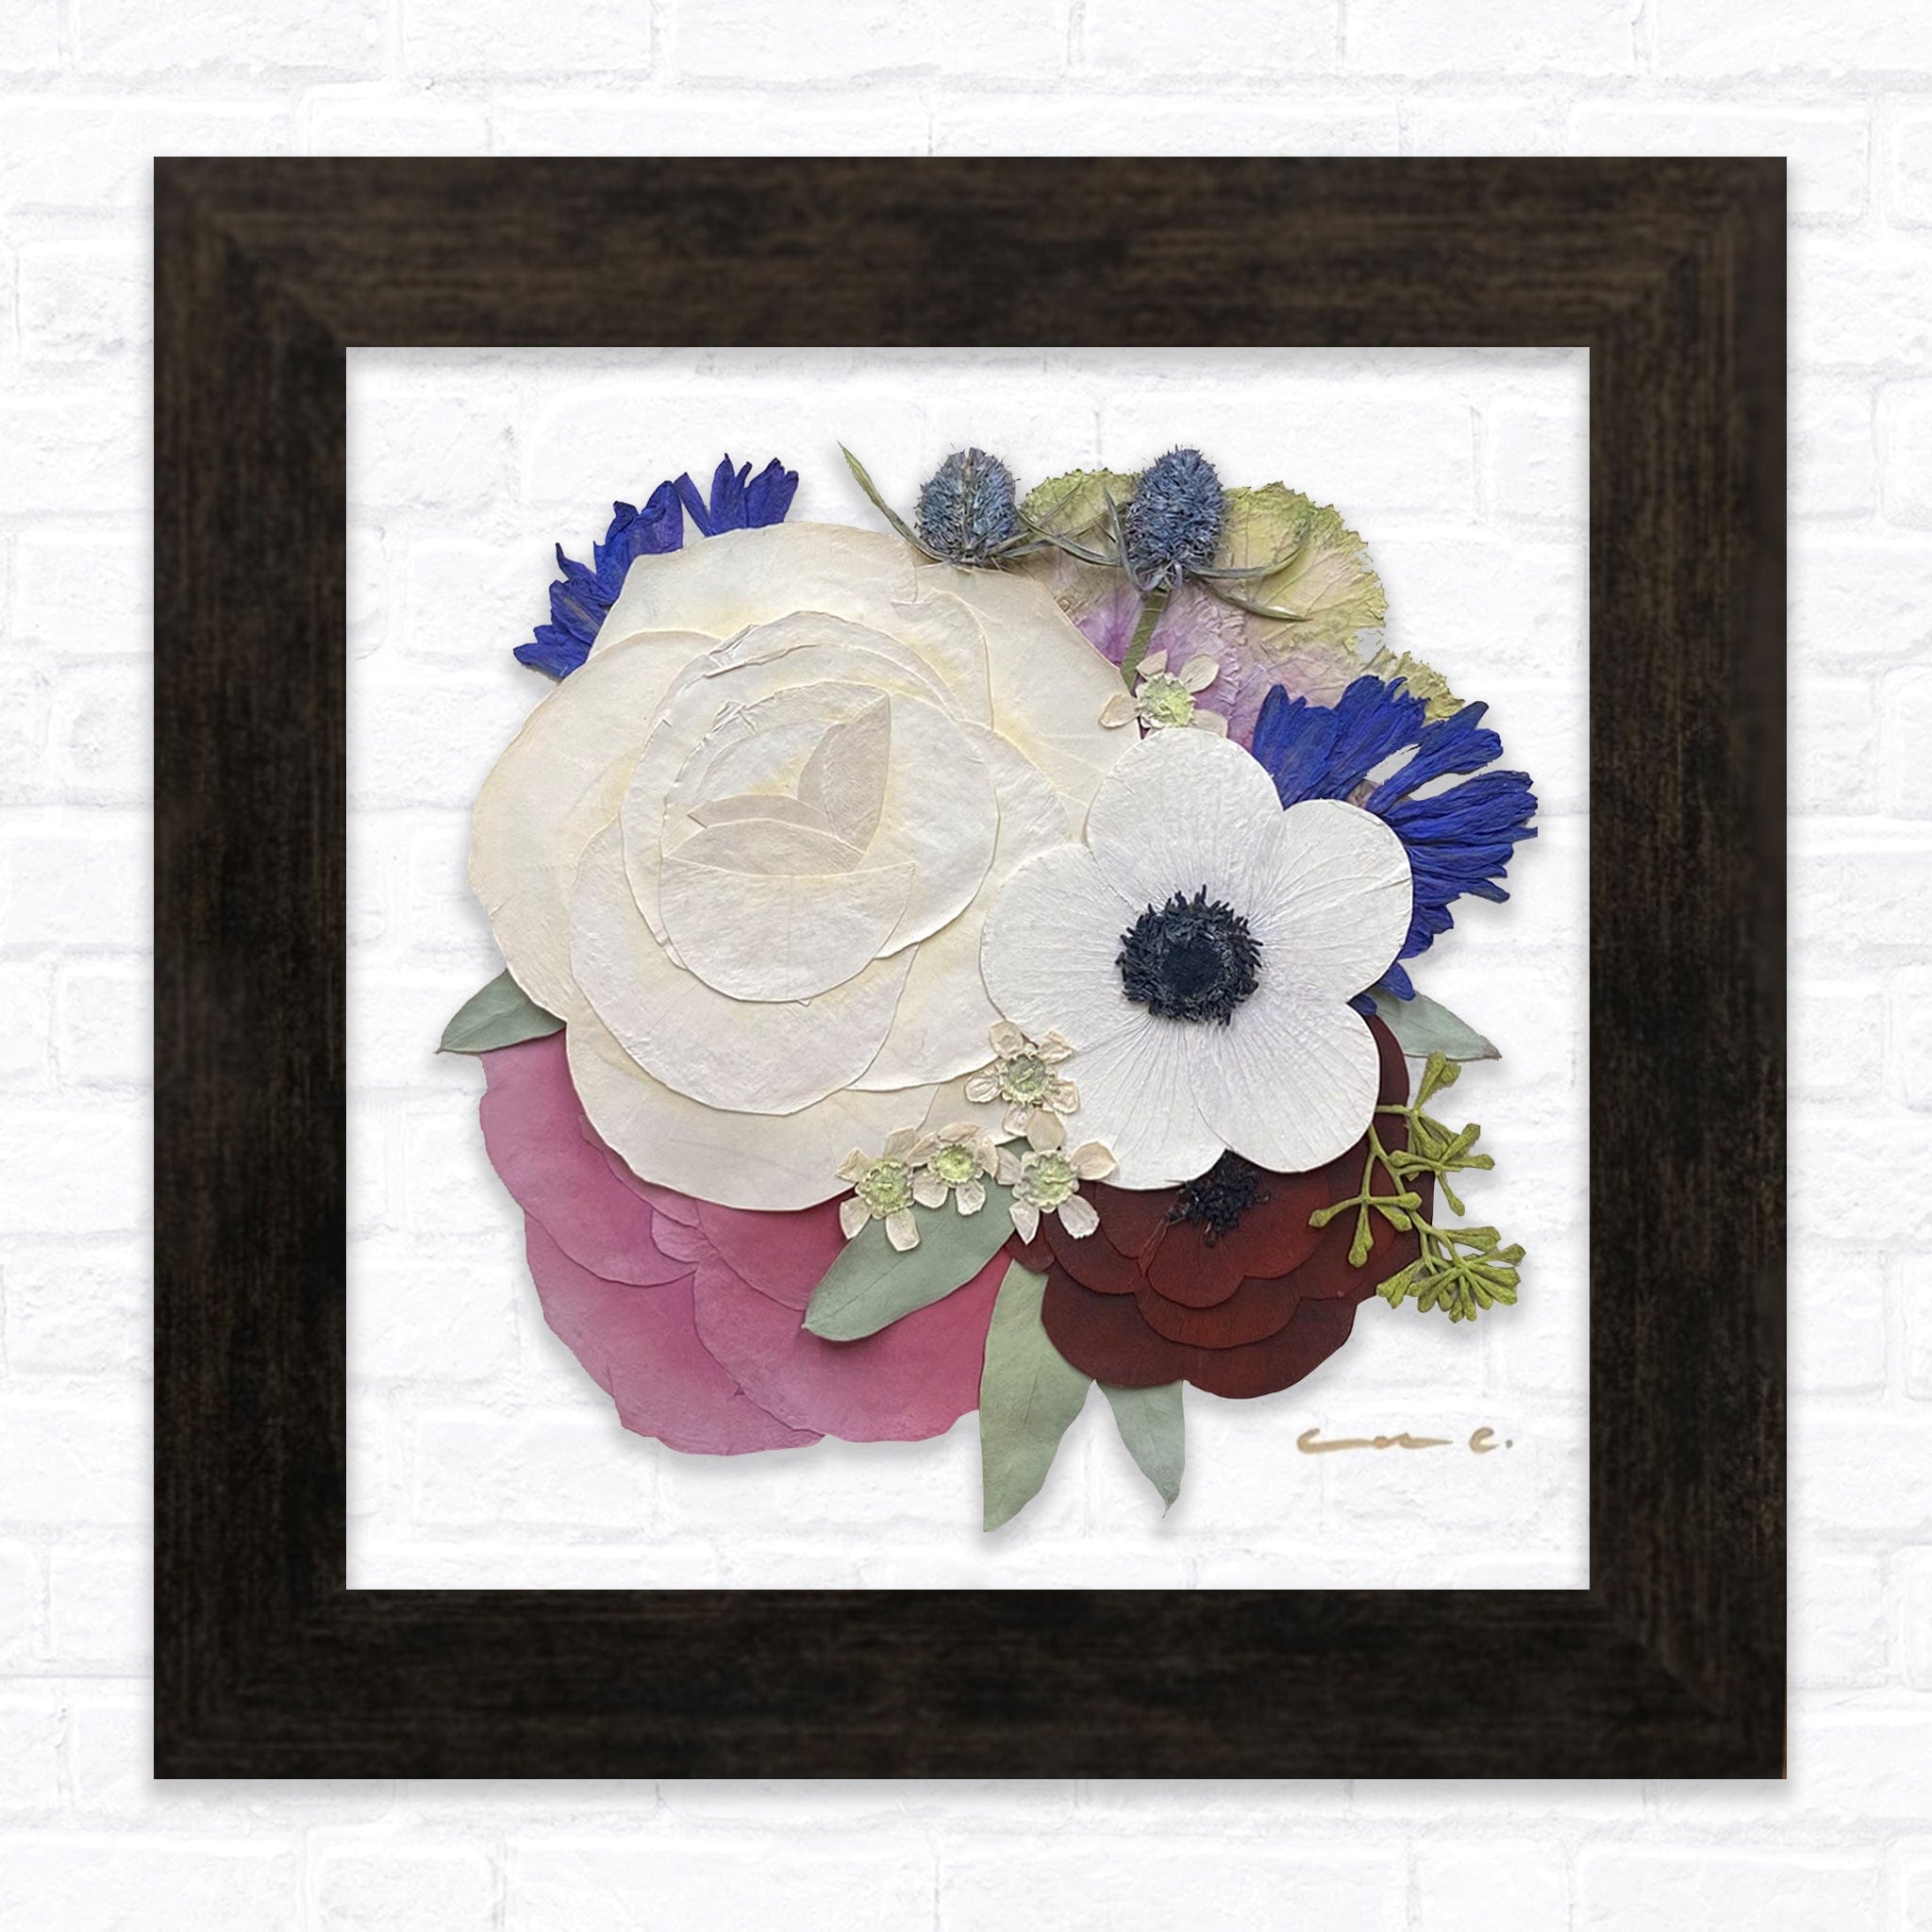 Designs by Andrea Pressed (Framed) Small / 6" x 6" / Square 6" x 6" Floating Frame